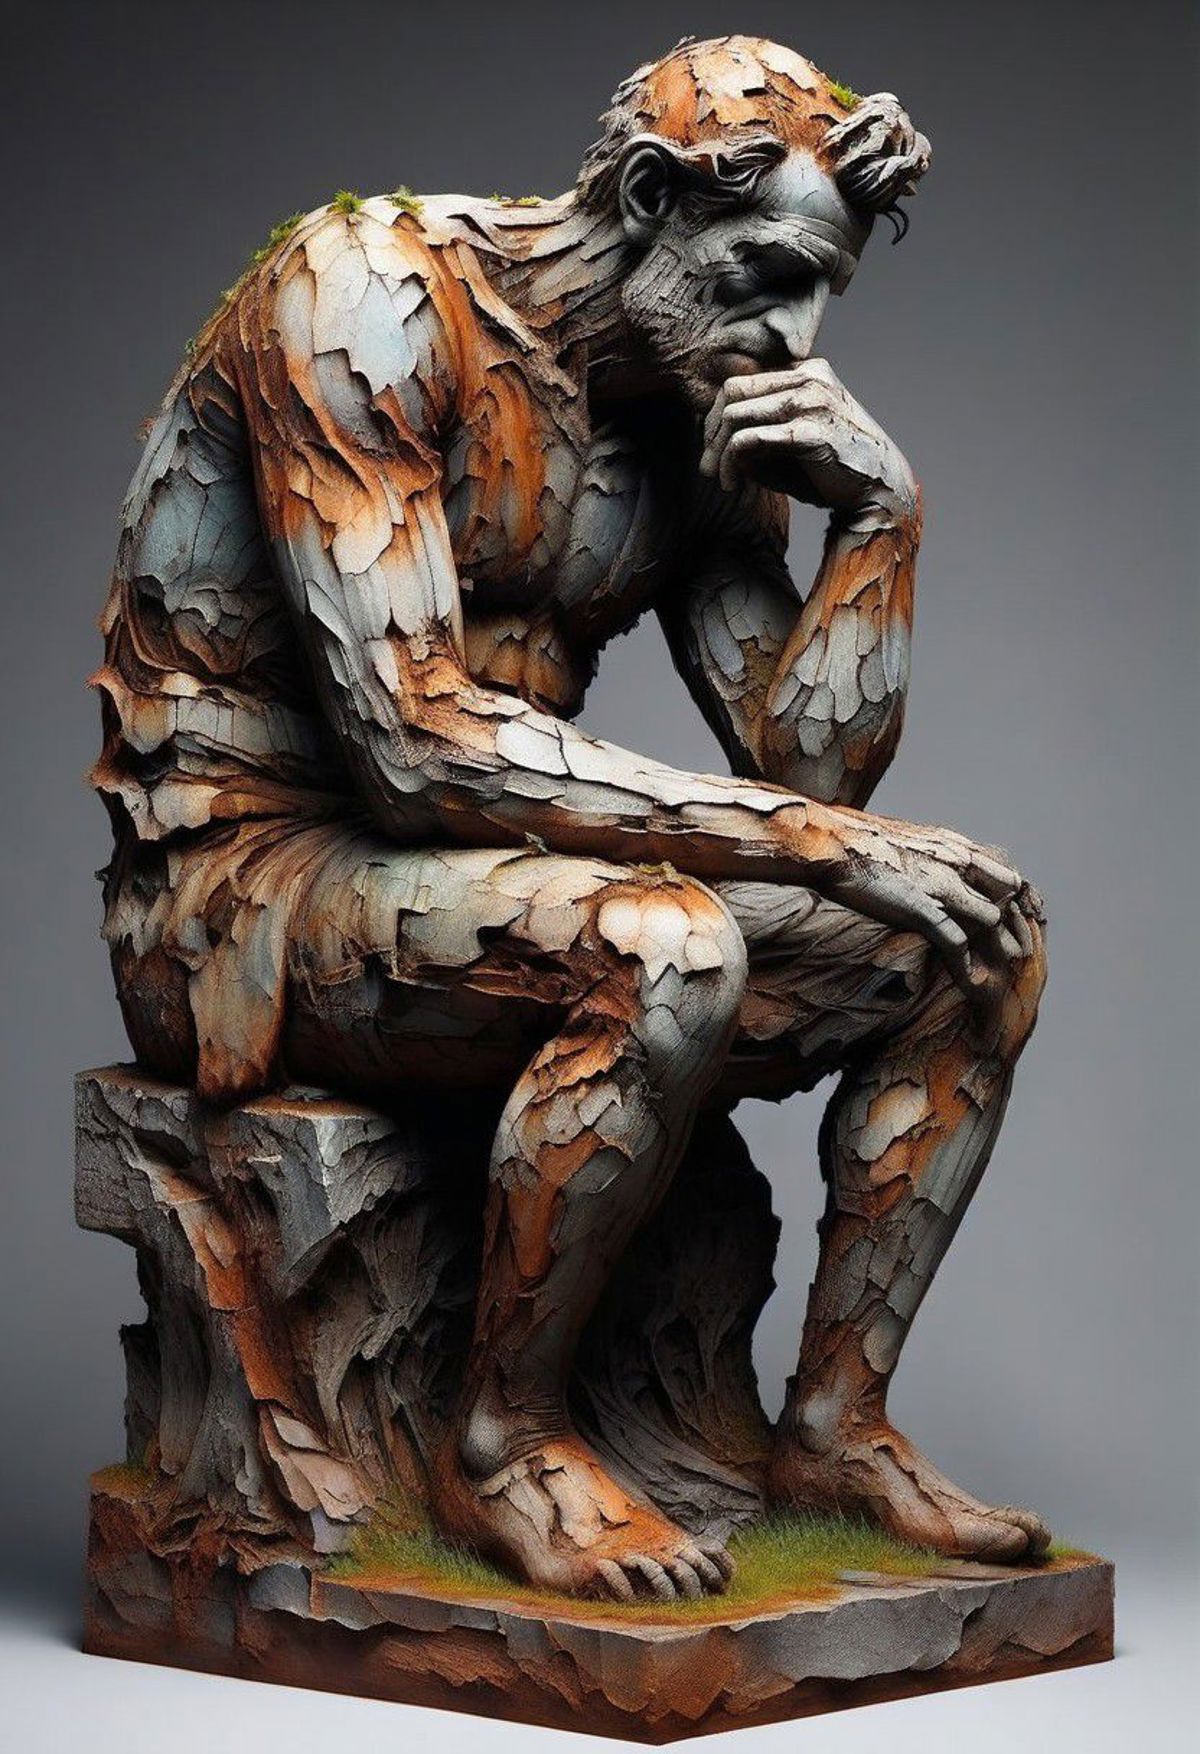 A statue of a man sitting on a tree stump and thinking.